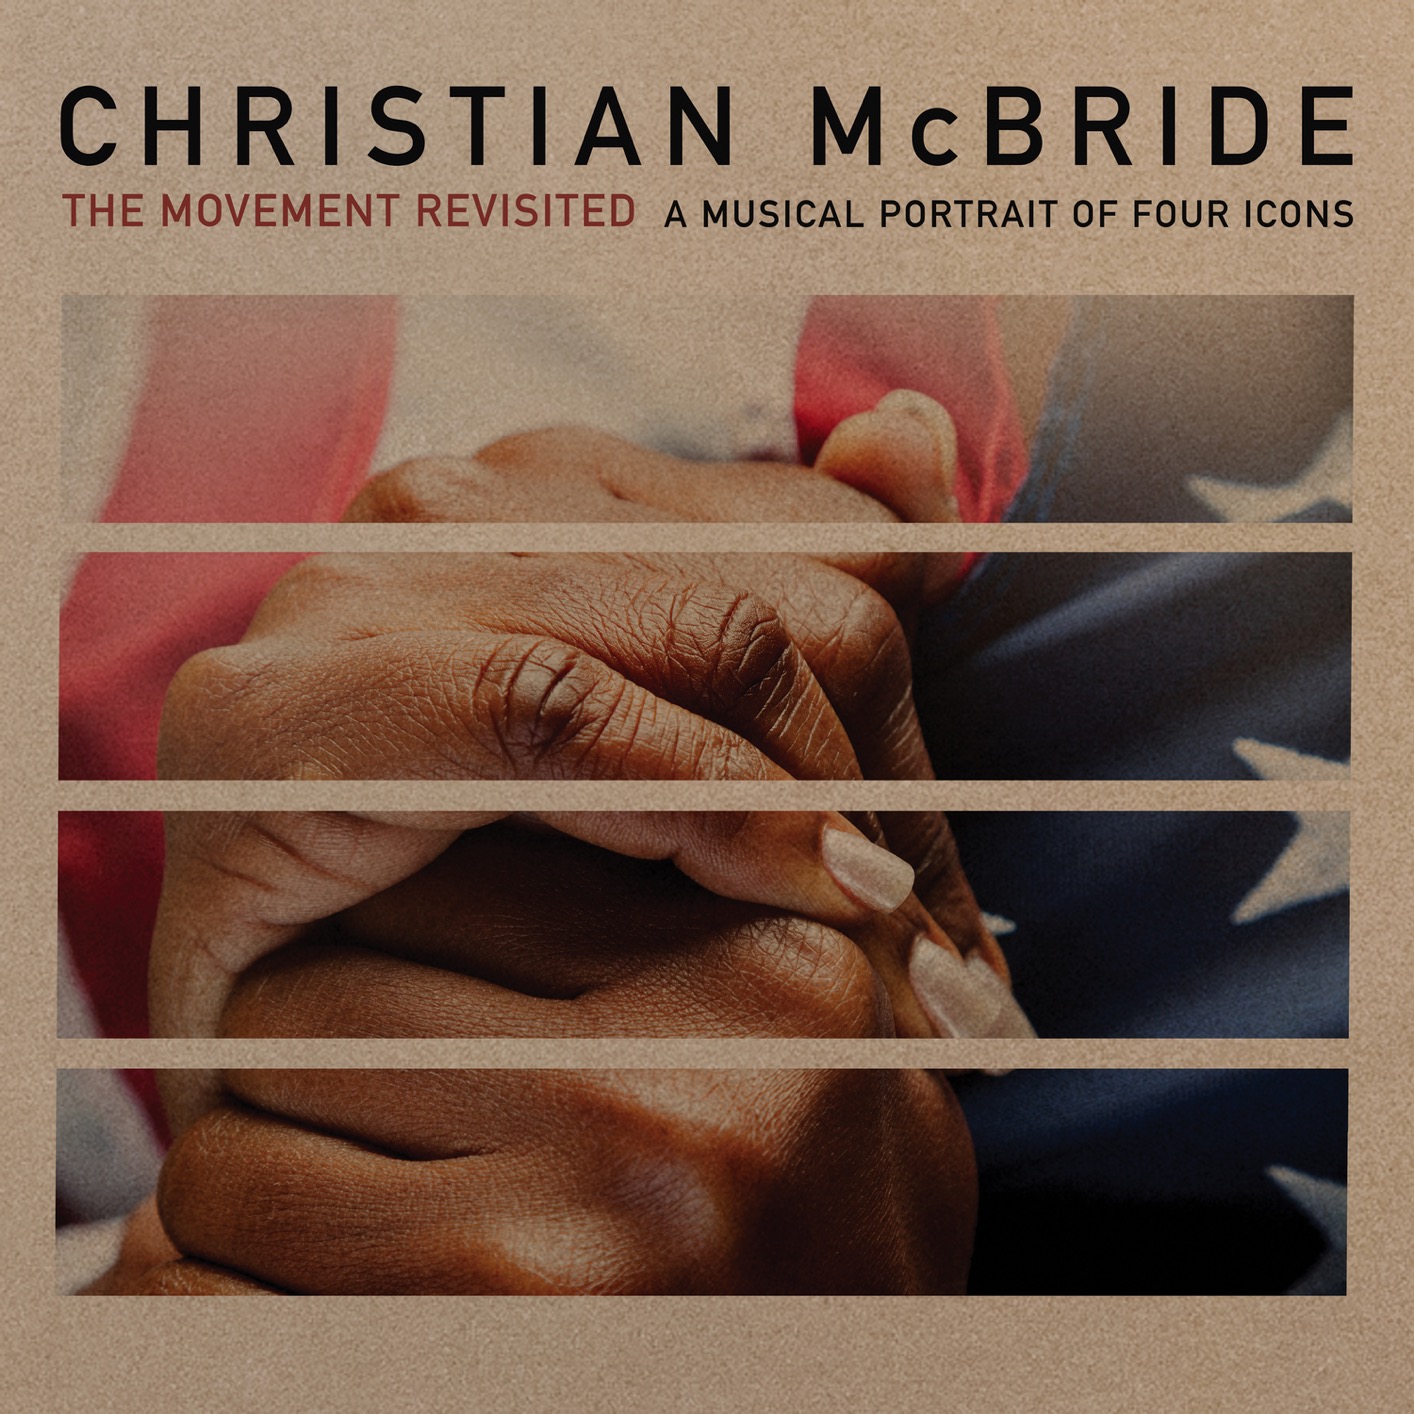 Christian Mcbride – The Movement Revisited: A Musical Portrait Of Four Icons (2020) [FLAC 24bit/96kHz]